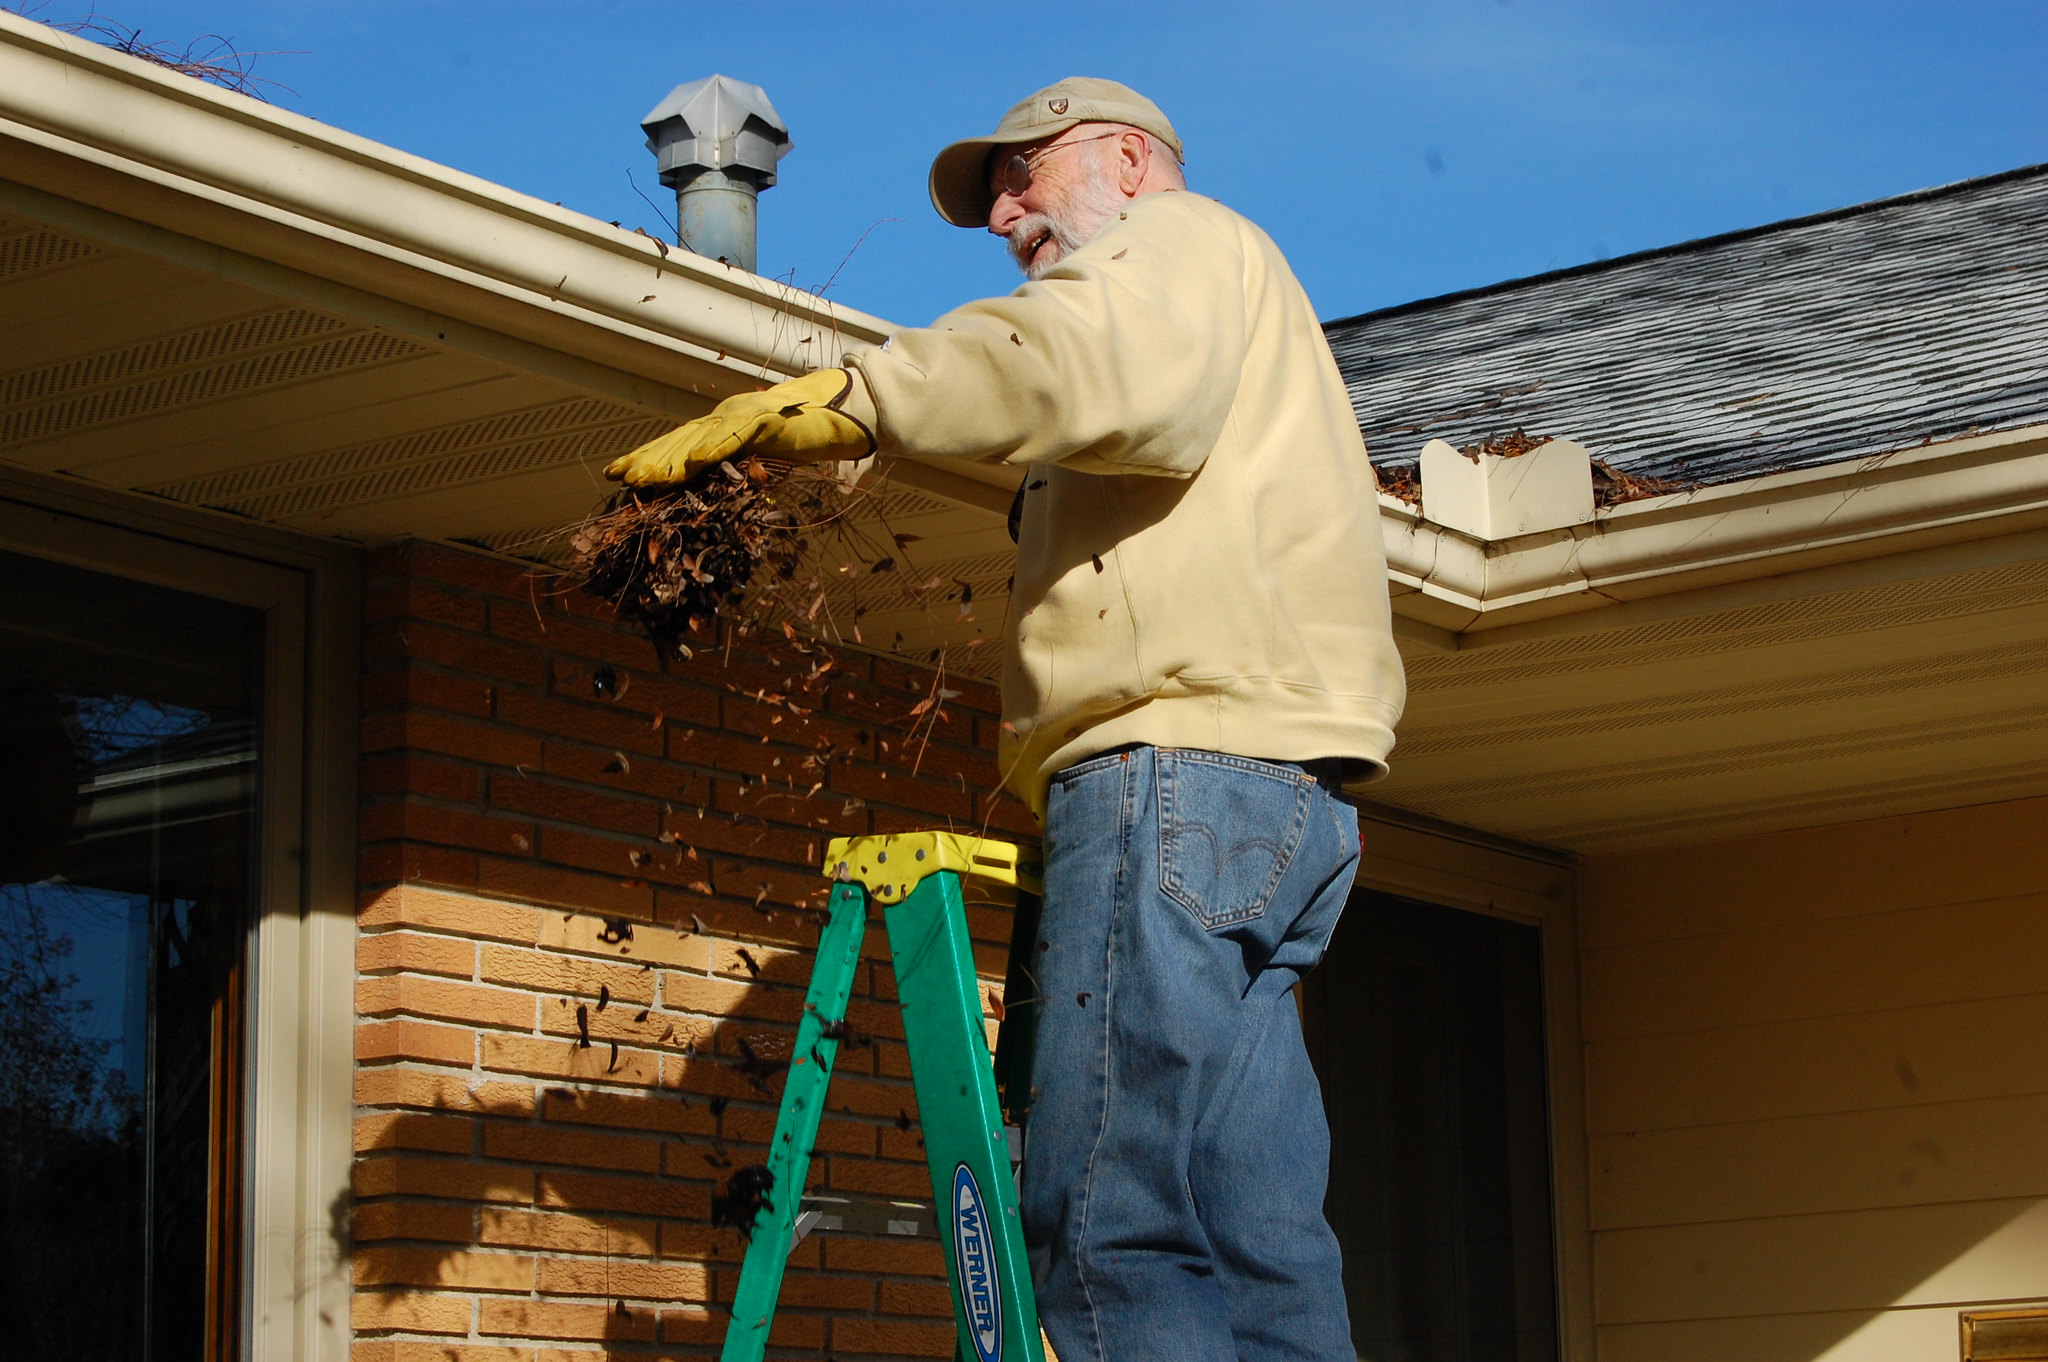 Man cleaning leaves from gutter.